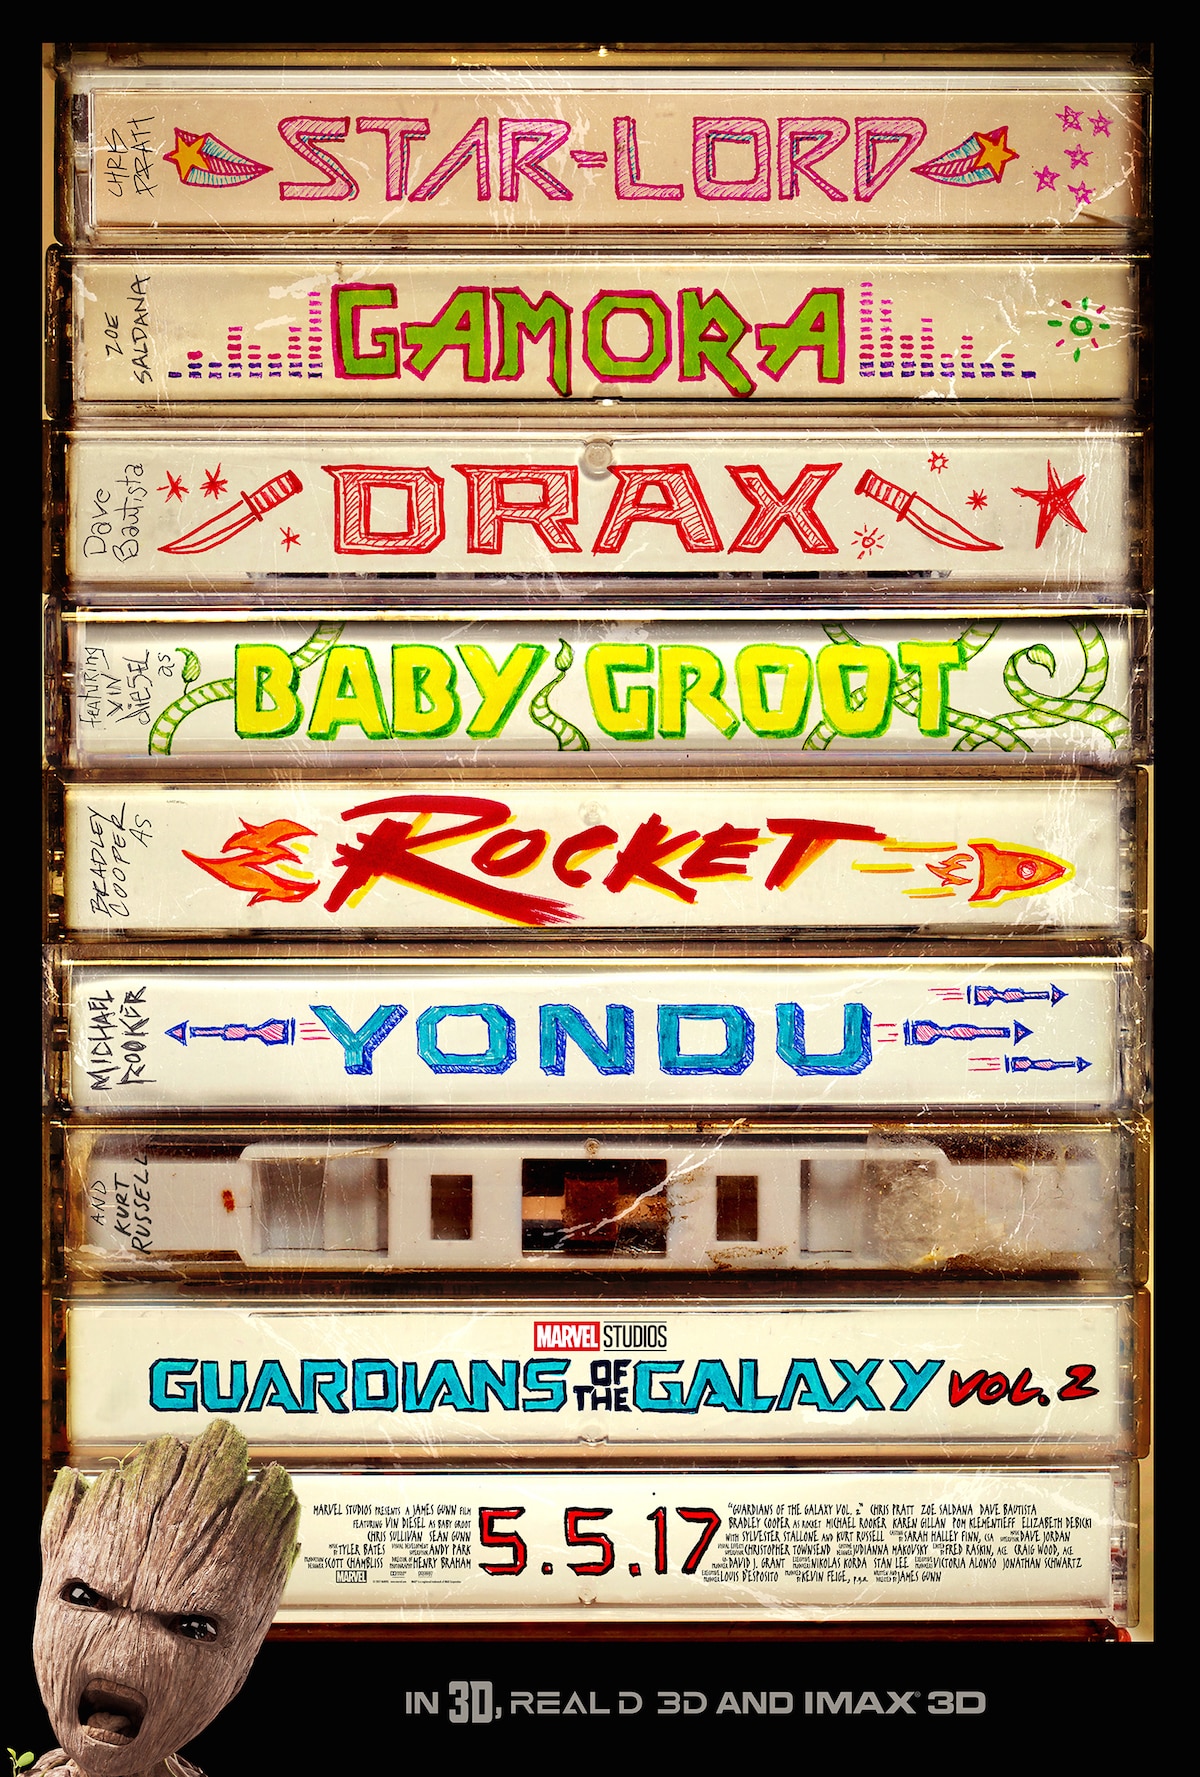 Extended Look for GUARDIANS OF THE GALAXY VOL. 2 Available! #GOTG2